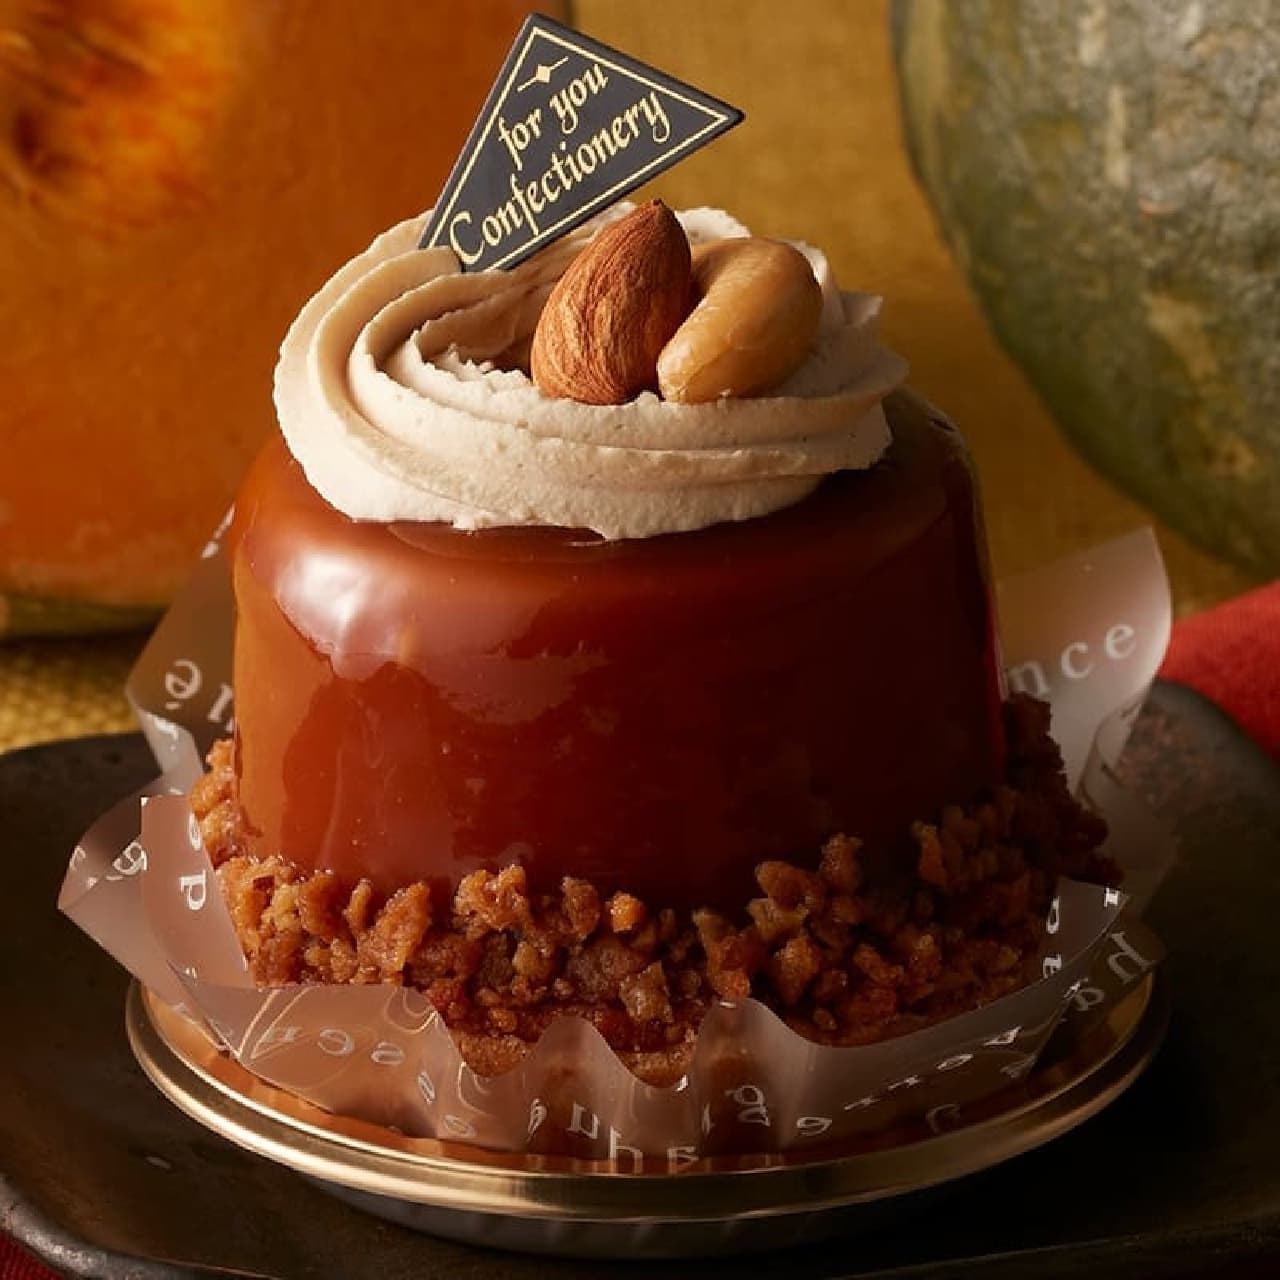 Chateraise "Caramel Nut and Pumpkin Cake